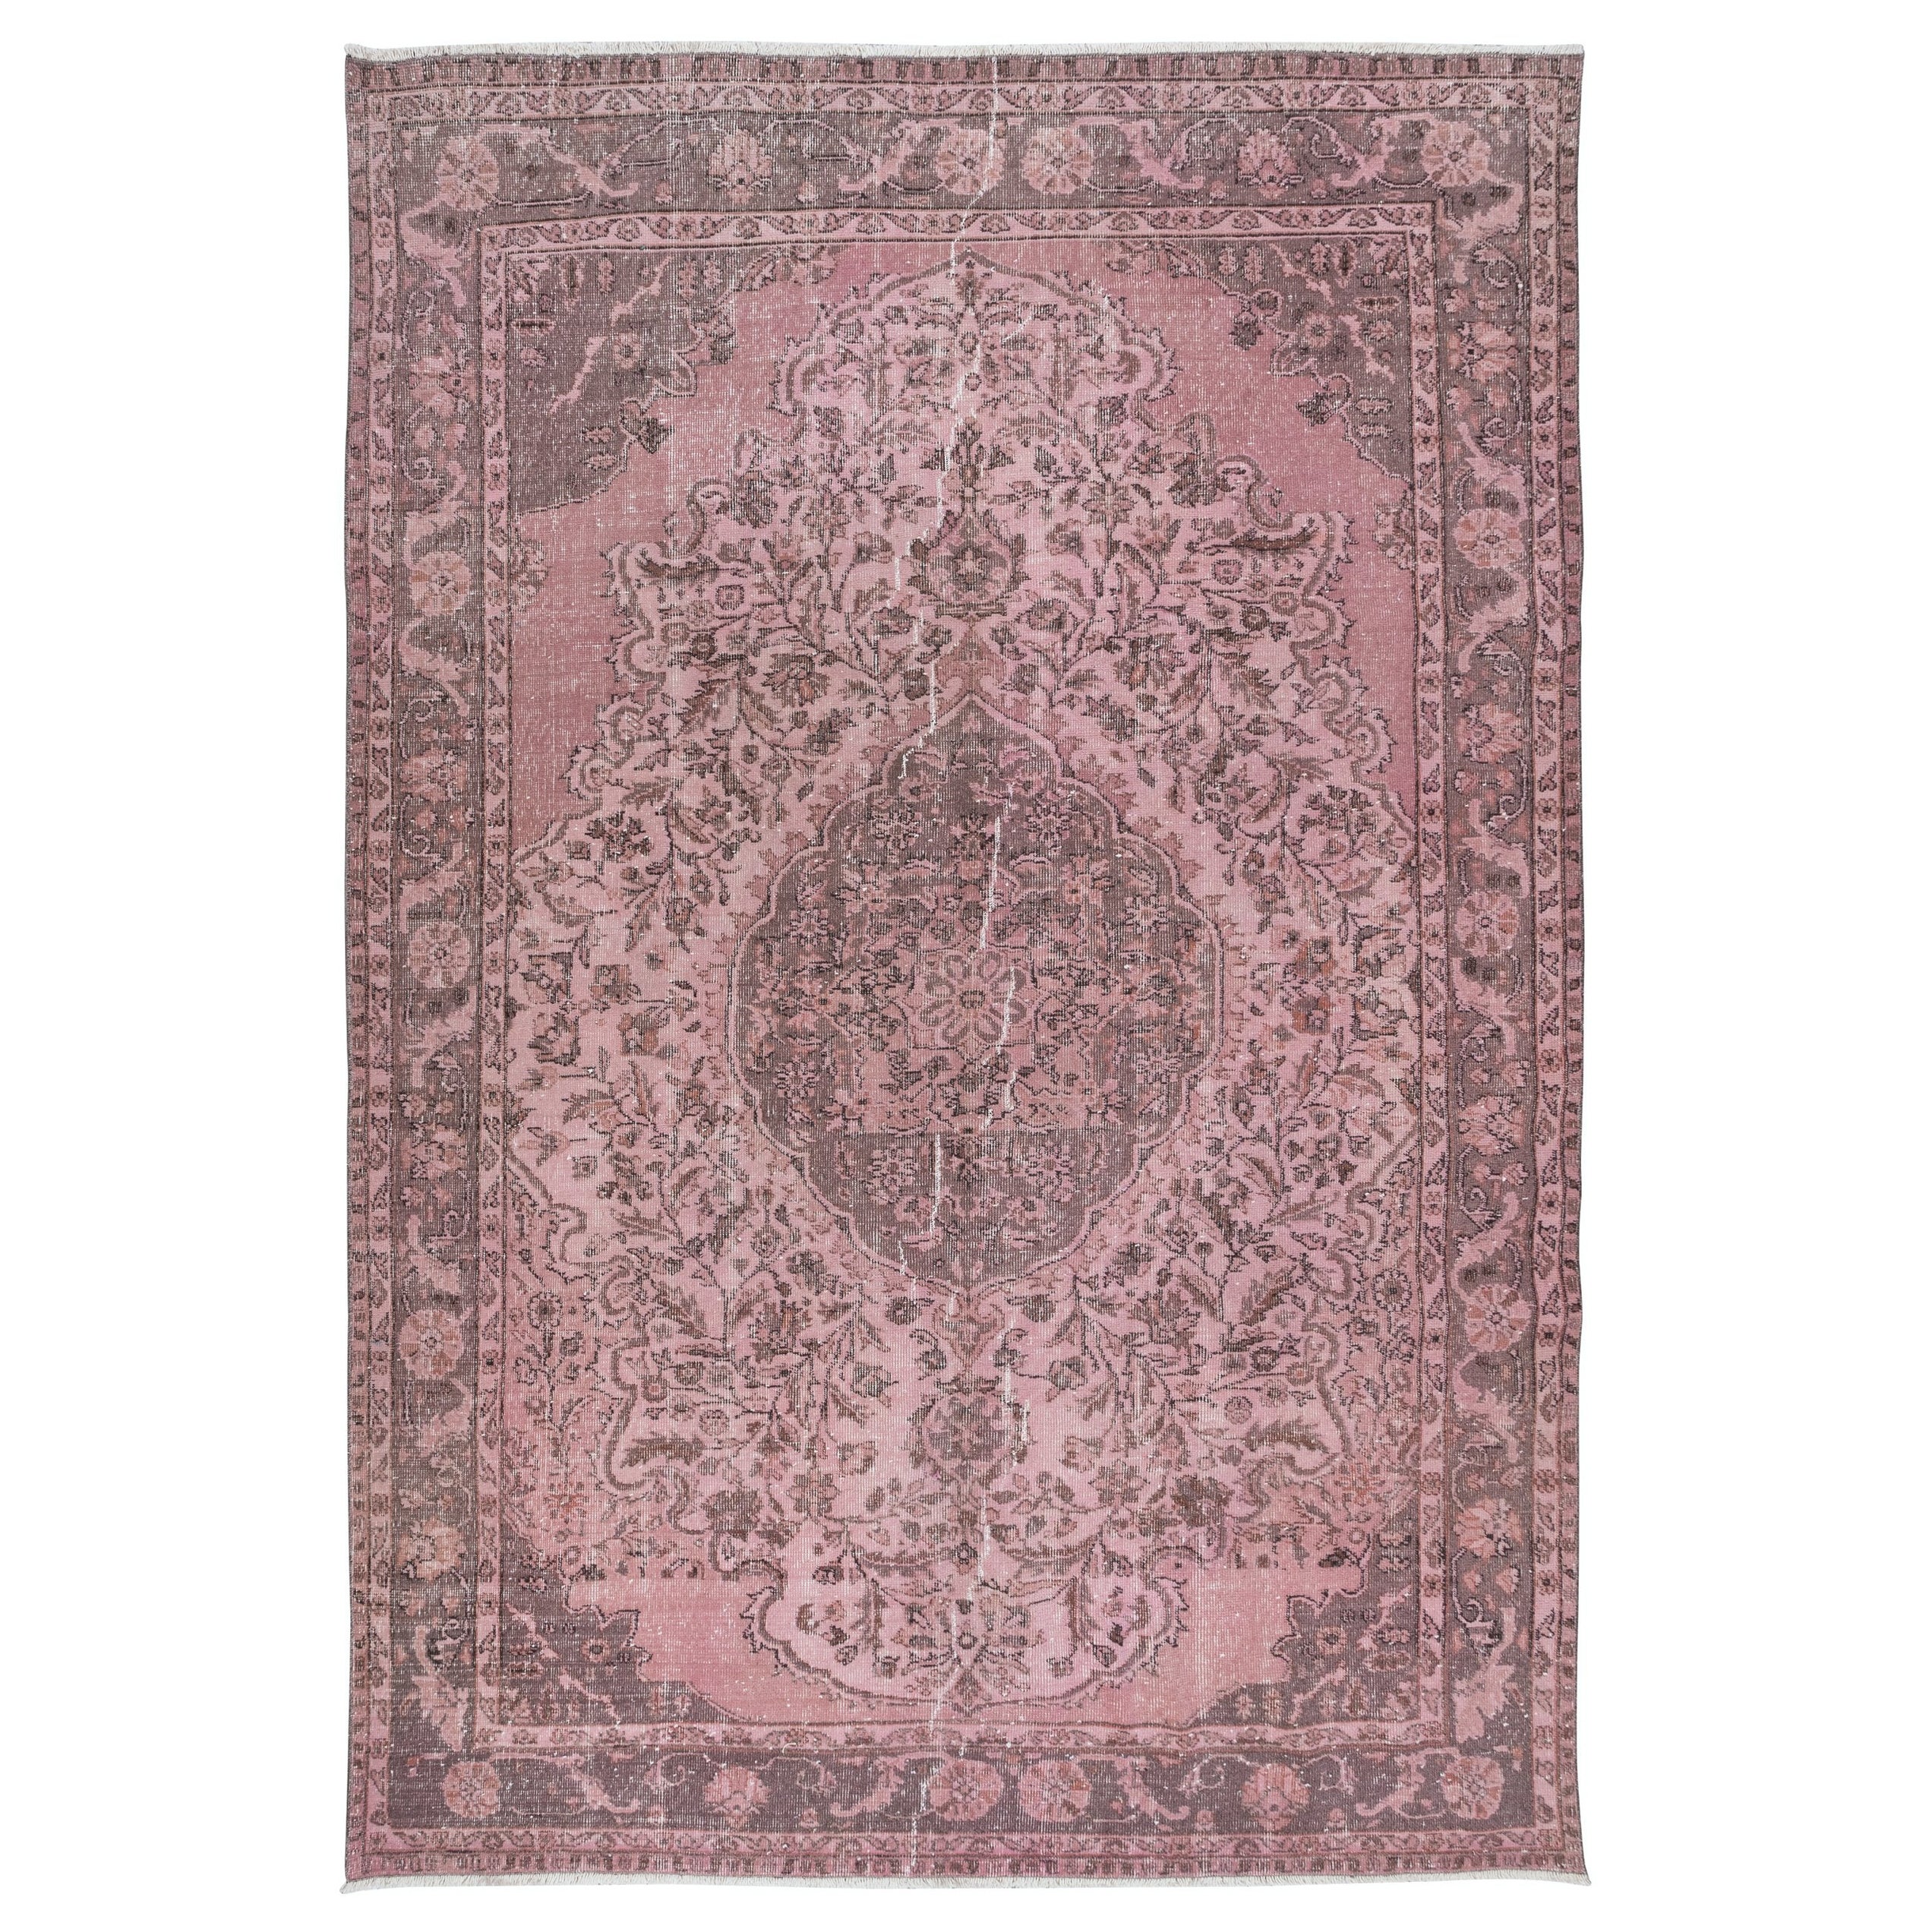 7x10.2 Ft One-of-a-Kind Contemporary Handmade Turkish Wool Area Rug in Soft Pink